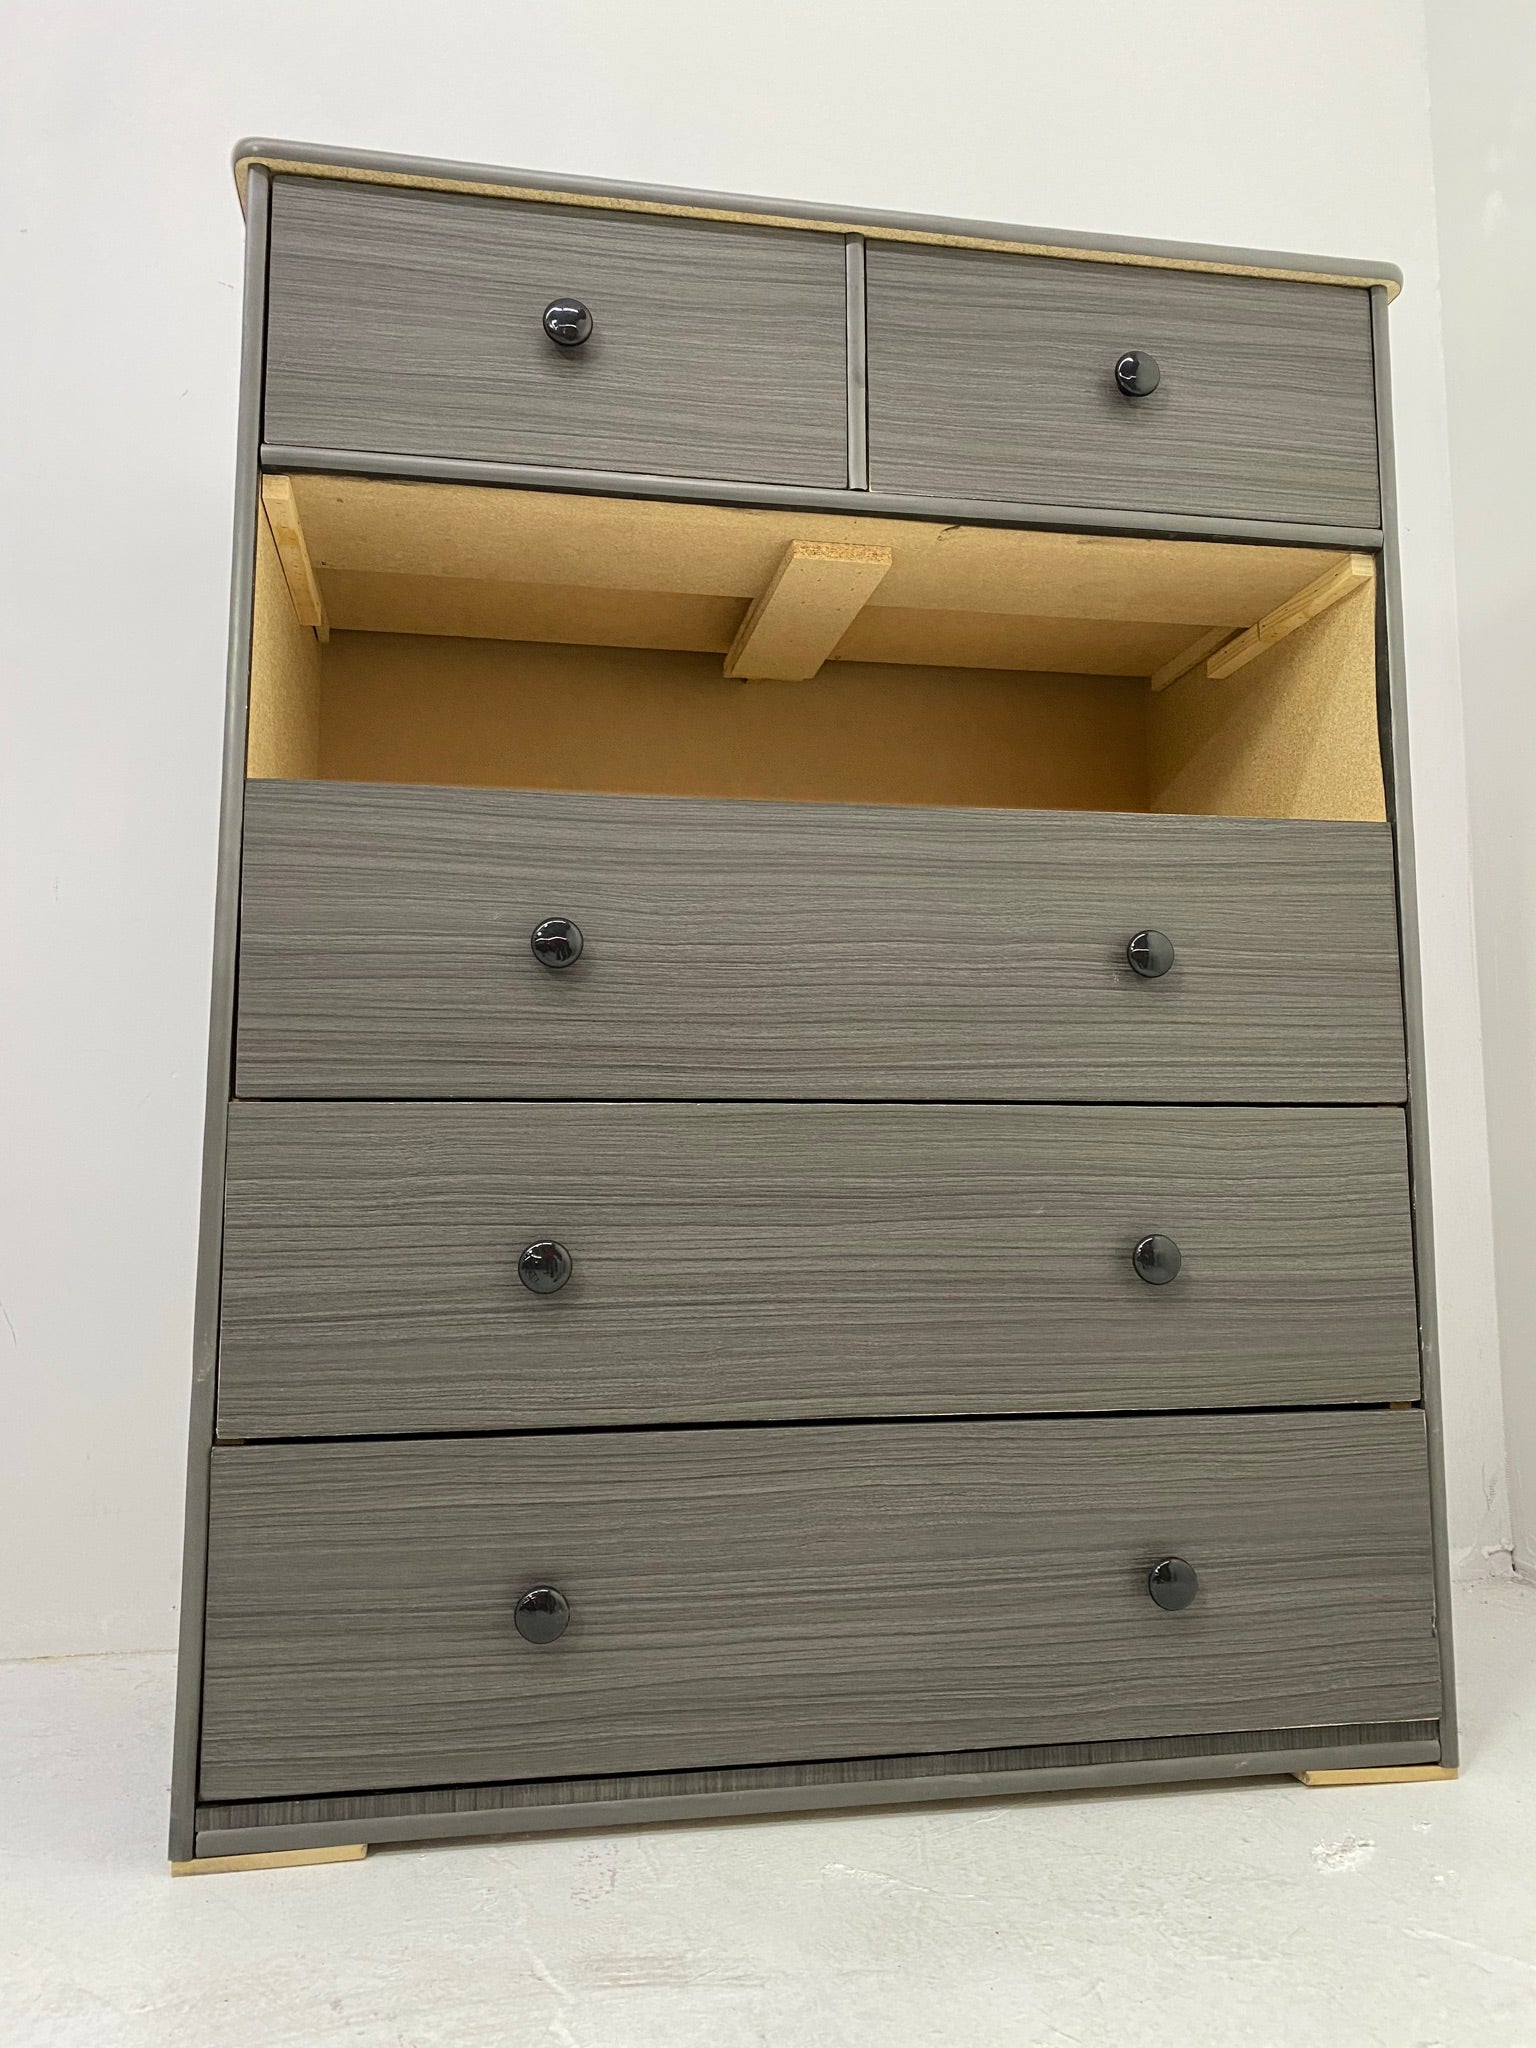 Upa 6 Drawer Large Chest